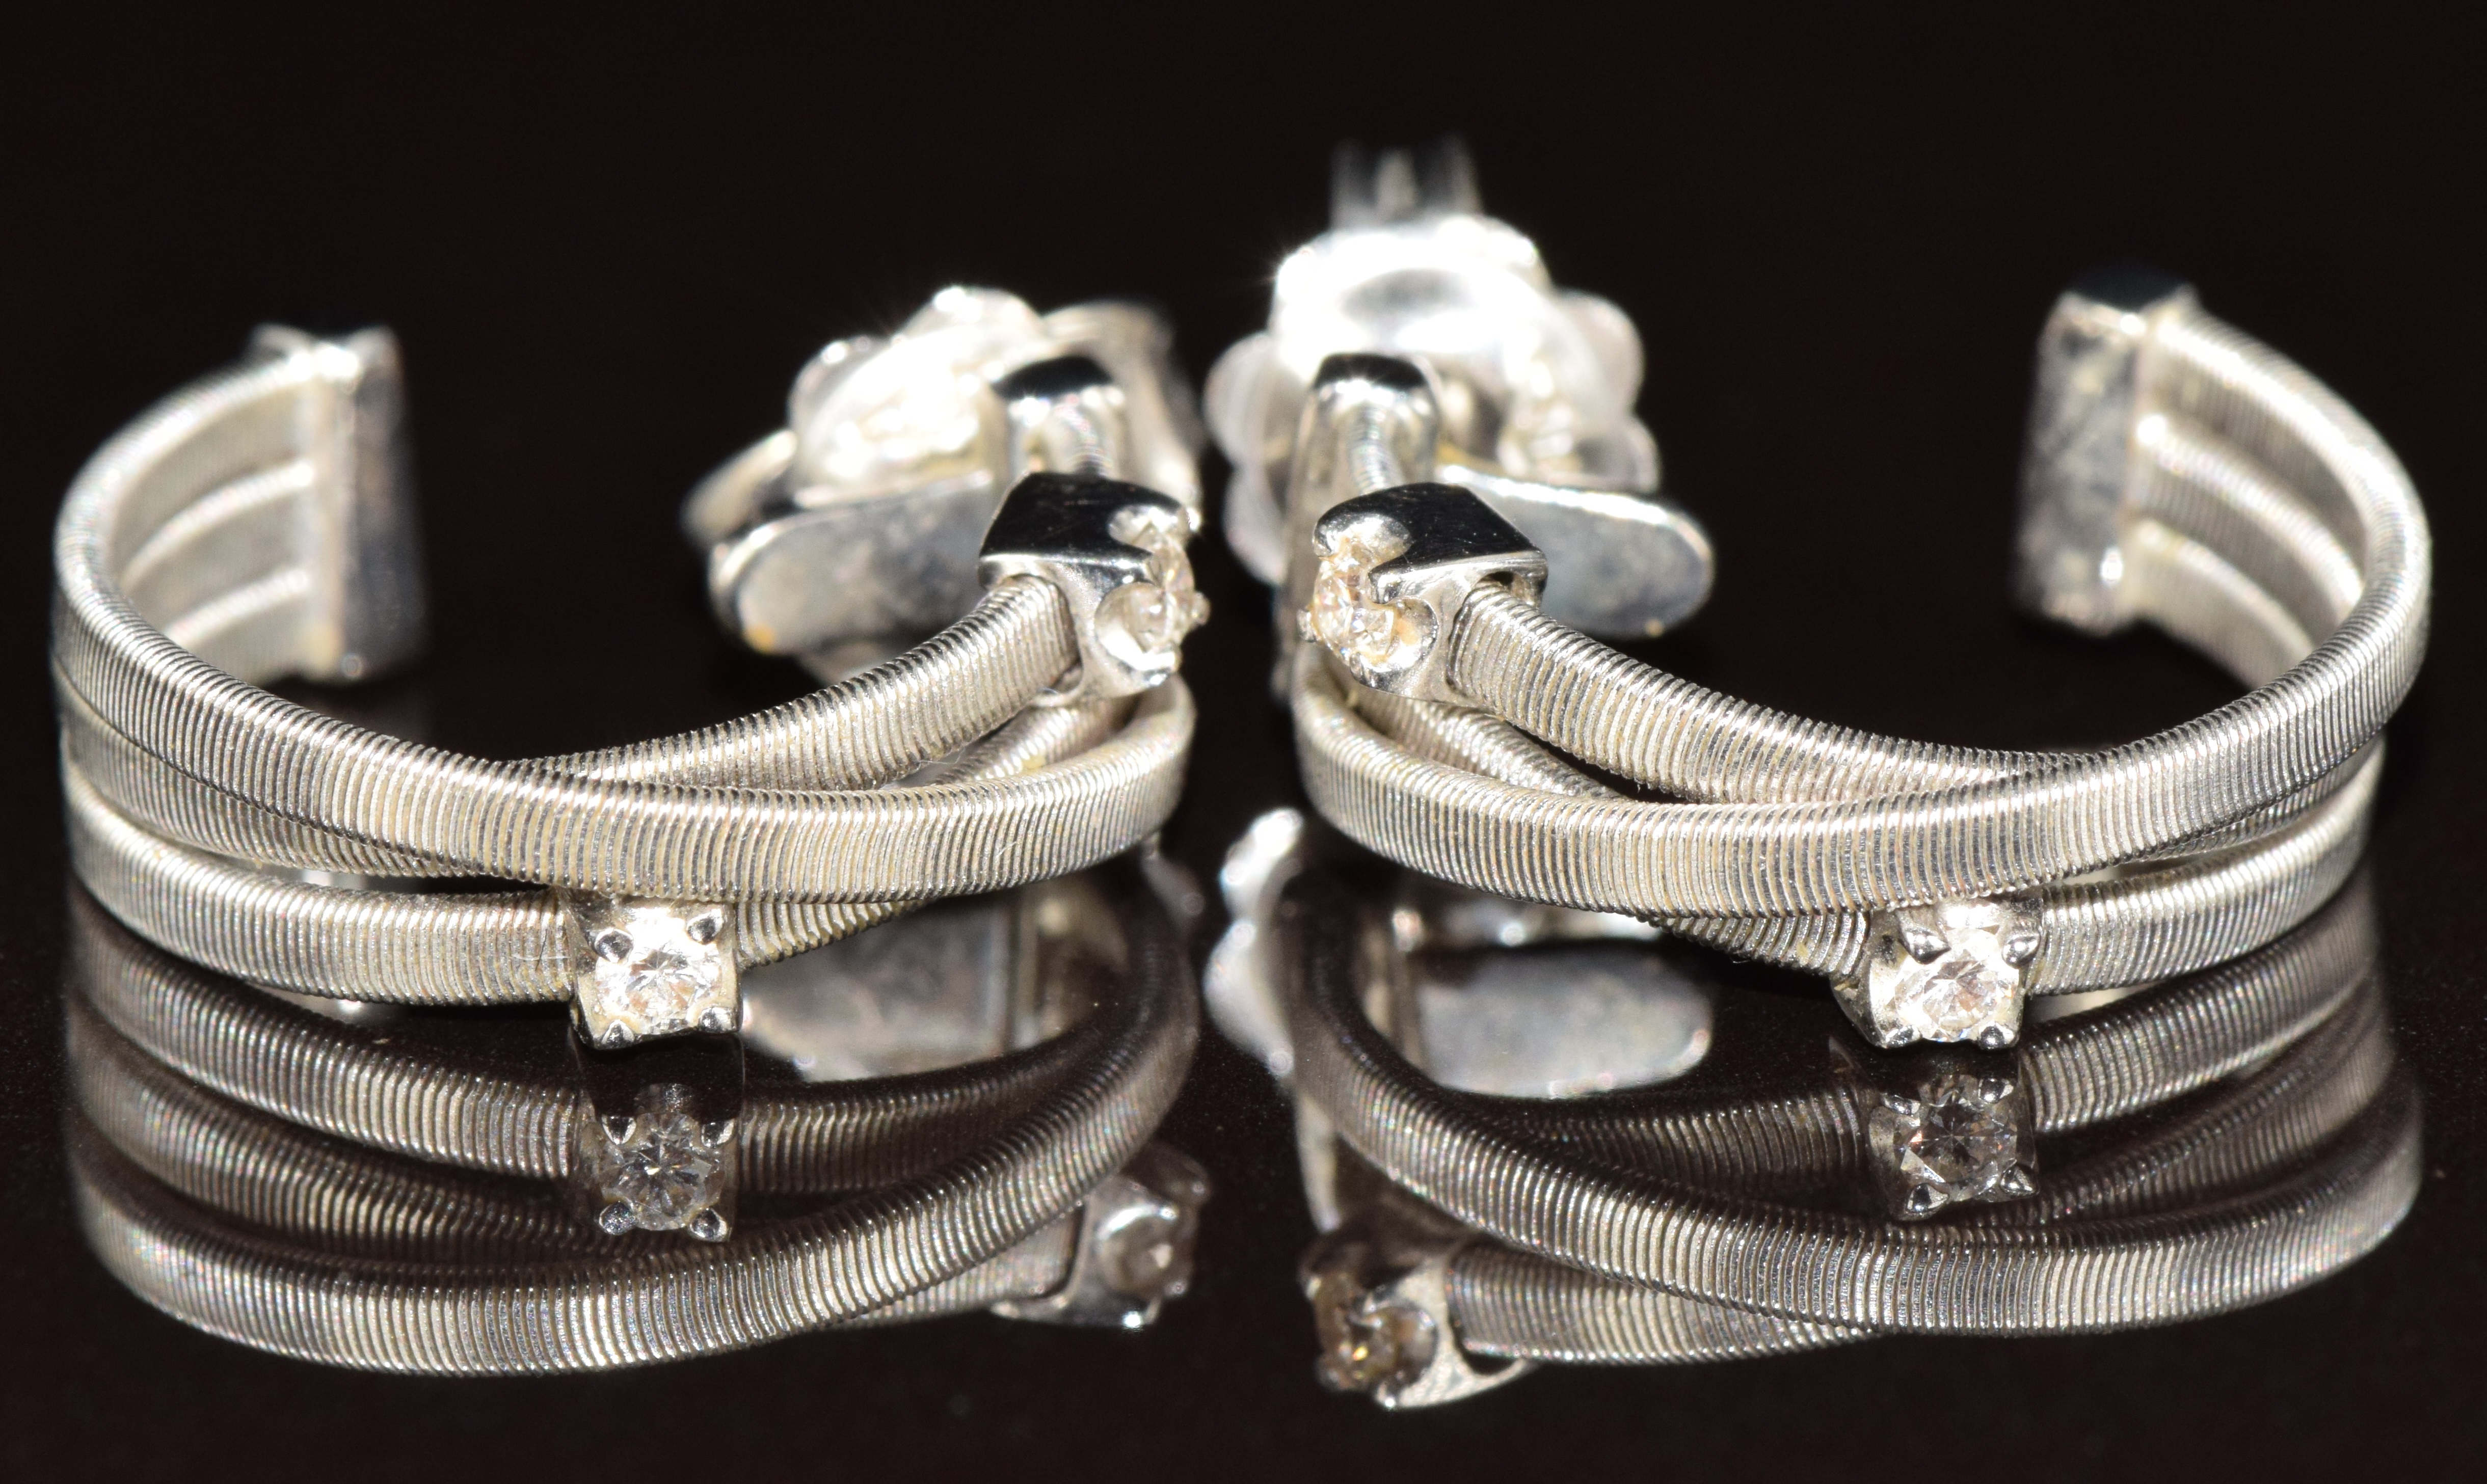 A pair of 18ct white gold earrings by Marco Bicego, each set with two diamonds, 6g